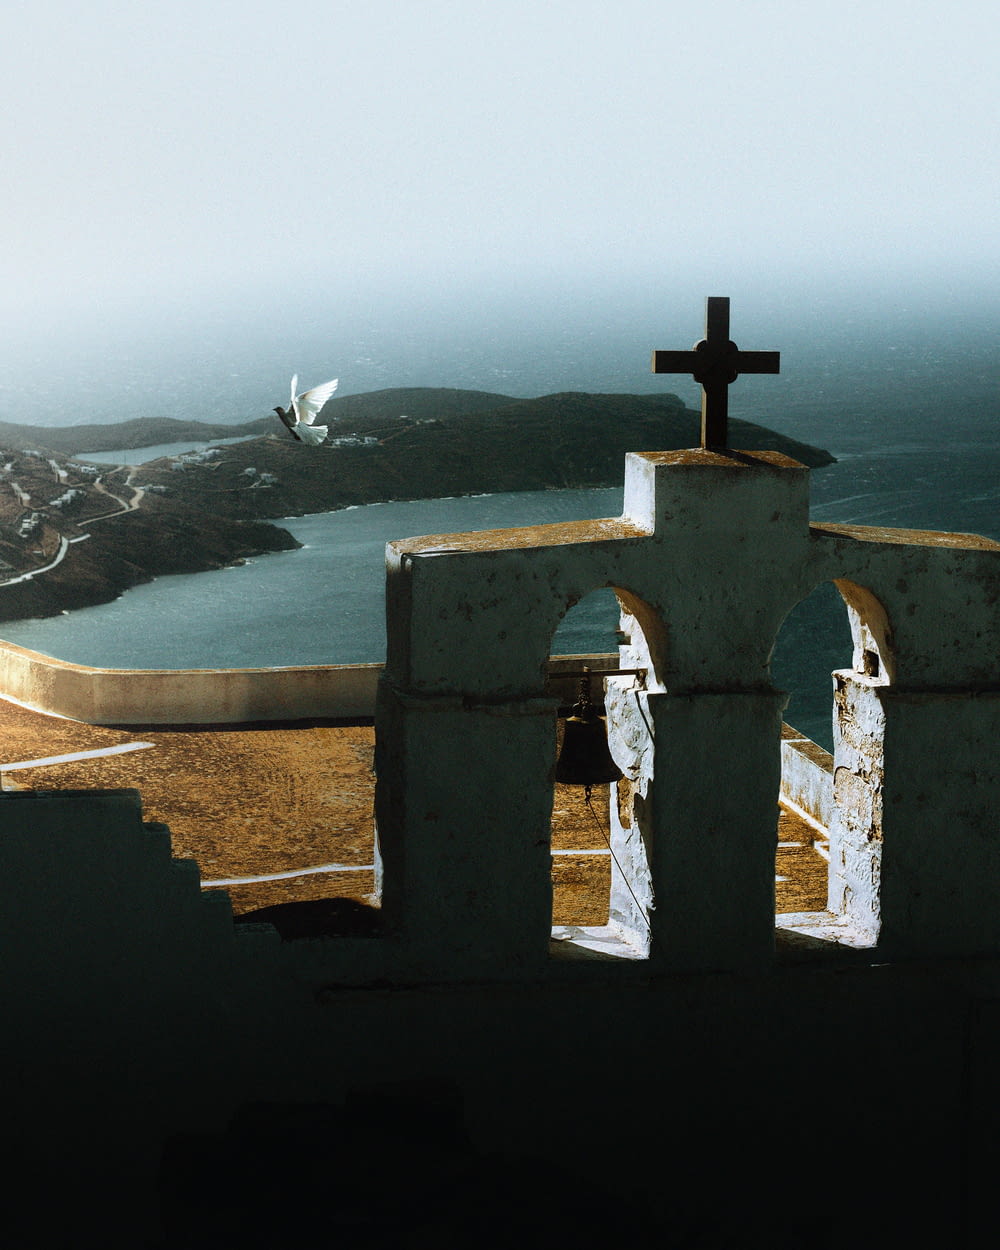 a cross on top of a building overlooking a body of water